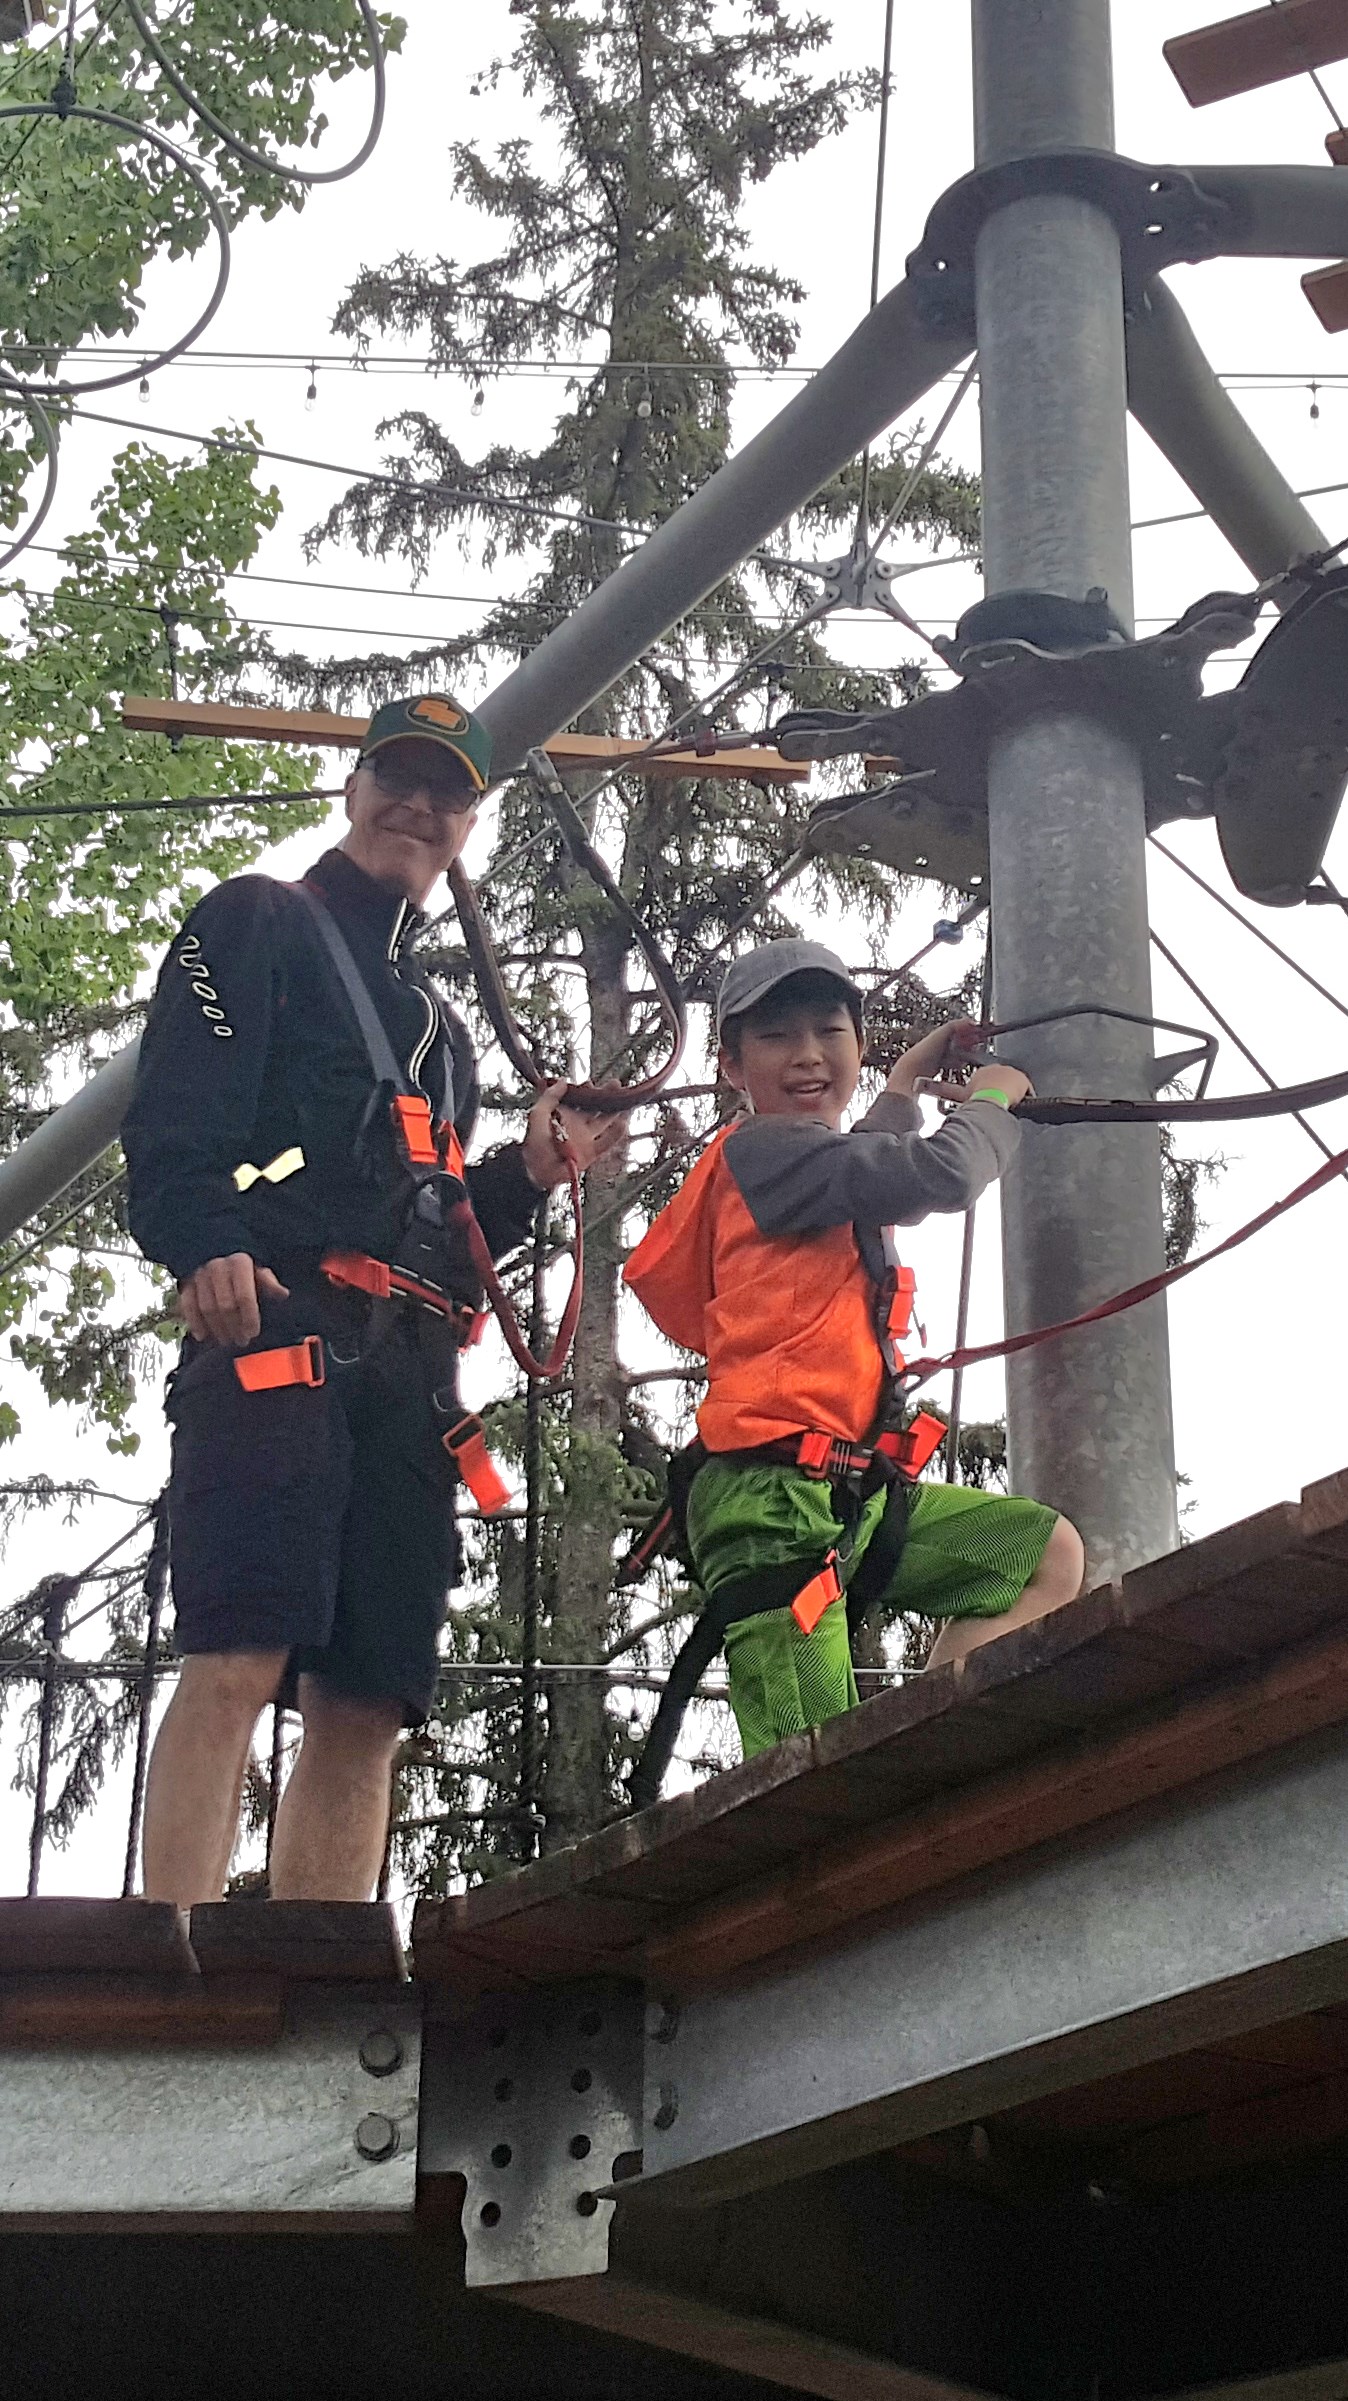 Our Student go on field trips throughout the year to enhance their learning experiences. Last year the grade 6 class got to go to the Aerial Park at Snow Valley. Hi Mr. Reid!